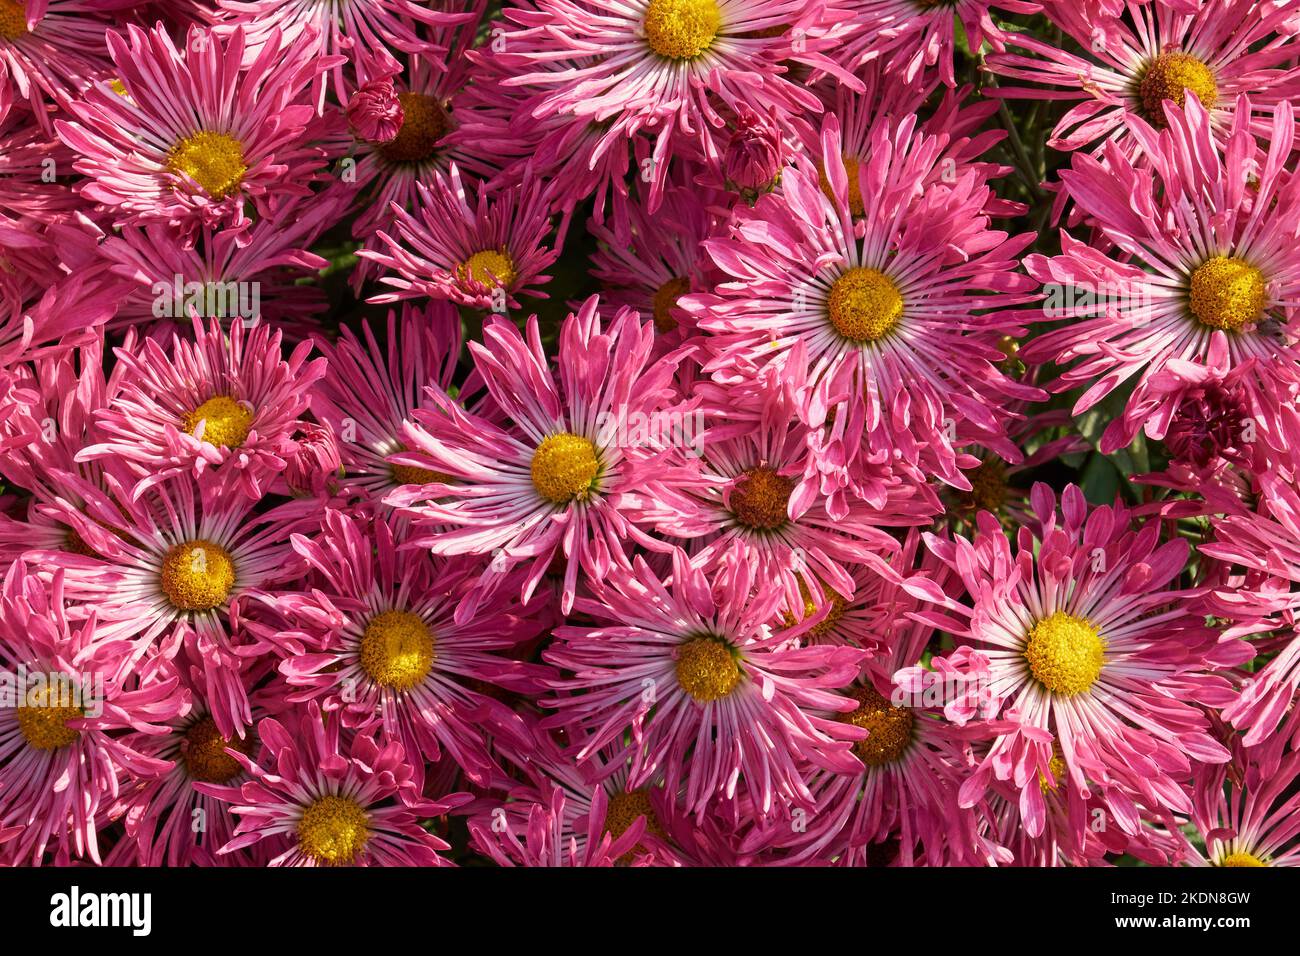 Background of pink and white chrysanthemum flowers. Top view. Stock Photo